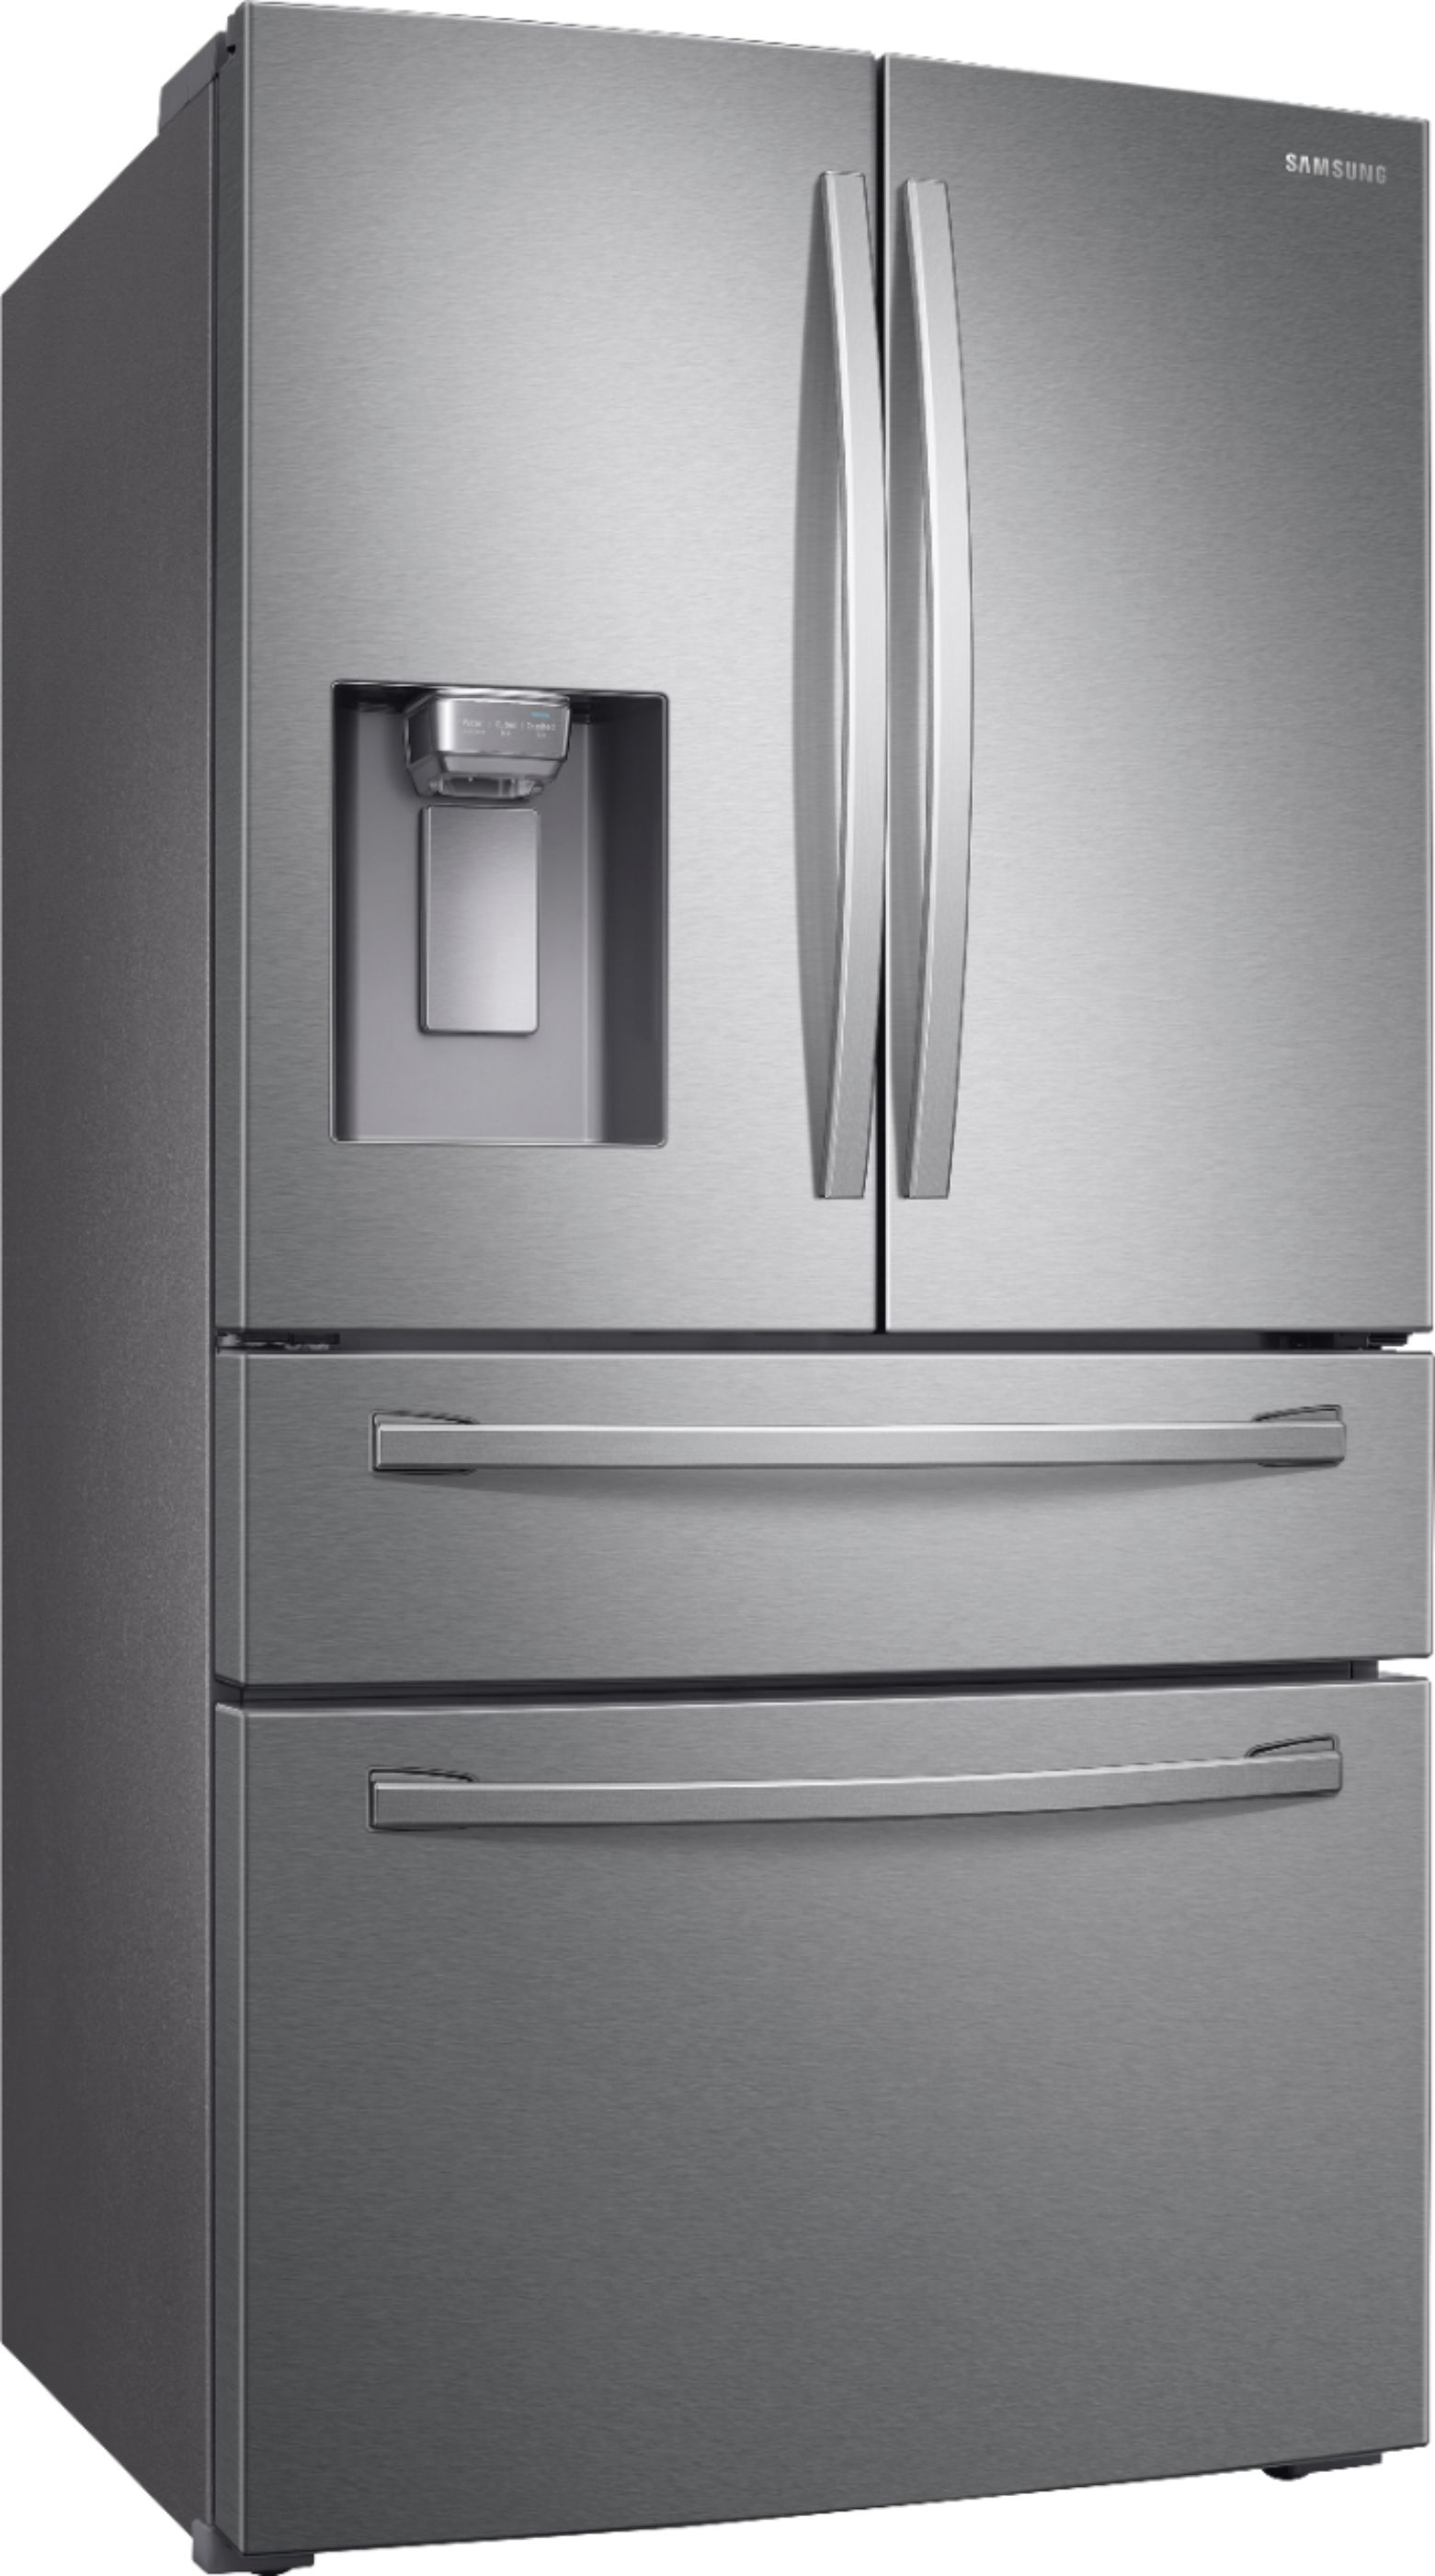 Angle View: KitchenAid - 25.8 Cu. Ft. 5-Door French Door Refrigerator - Black Stainless Steel